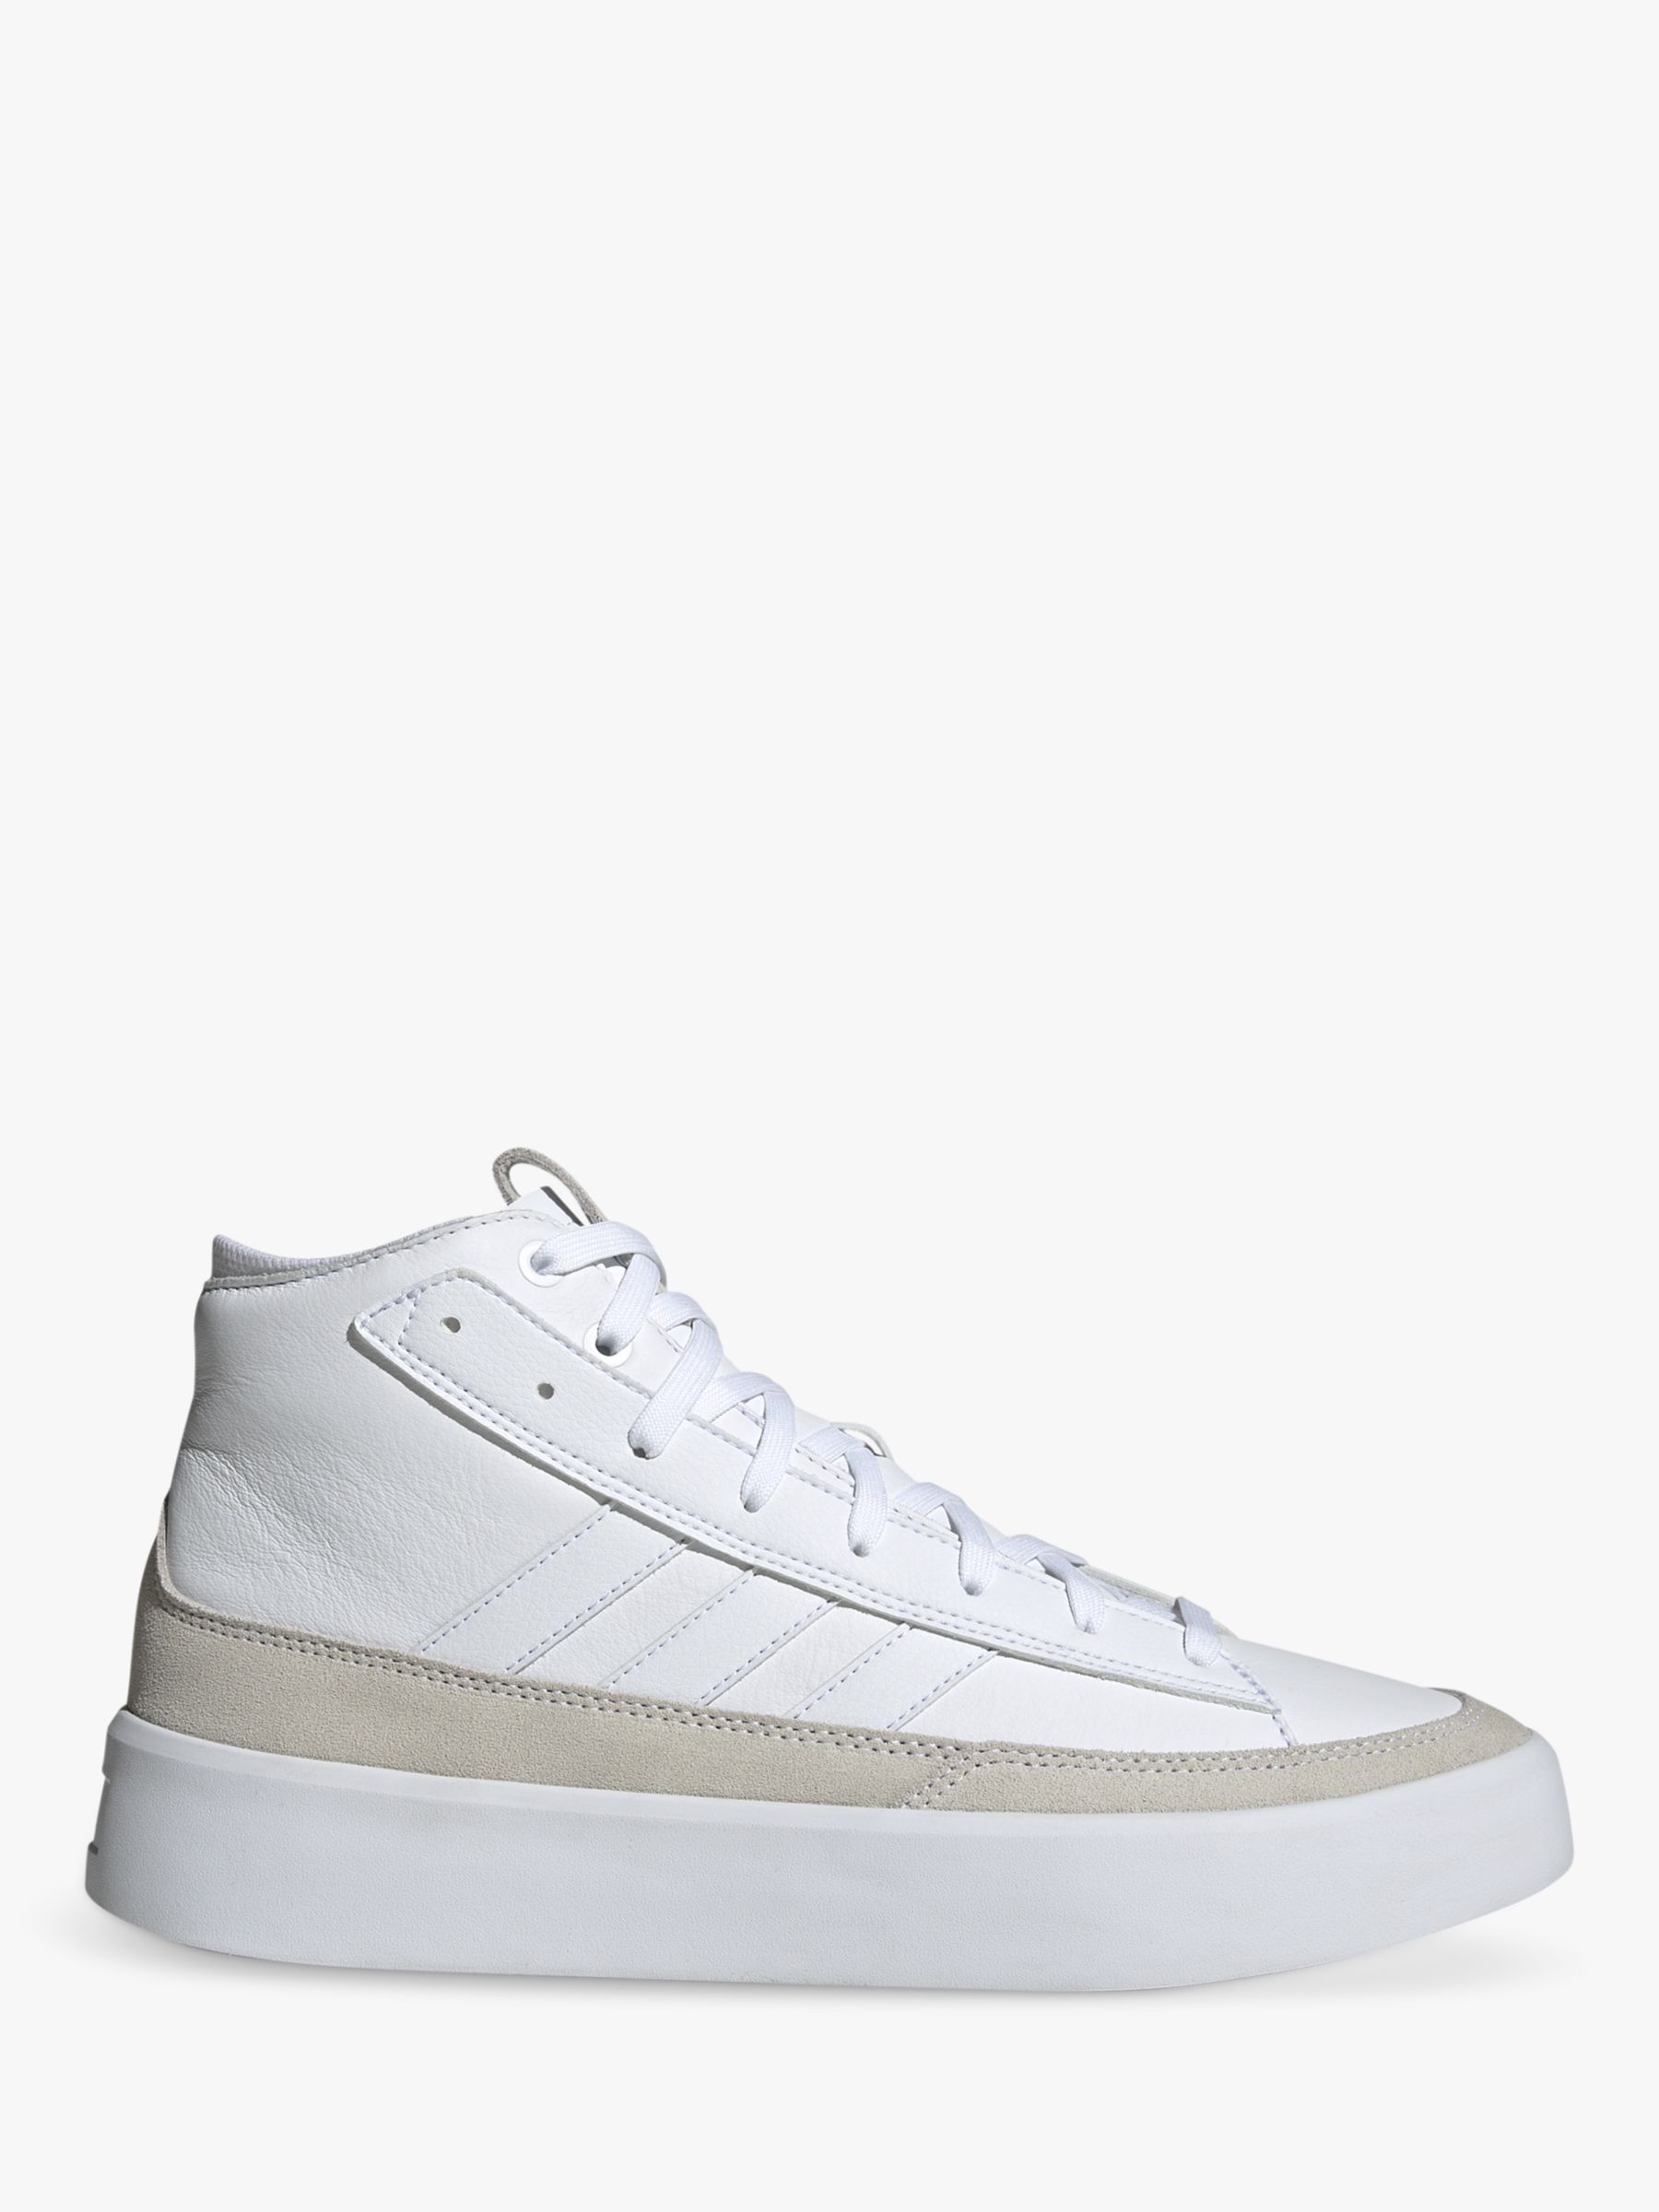 adidas ZNSORED Hi-Top Leather Trainers, White